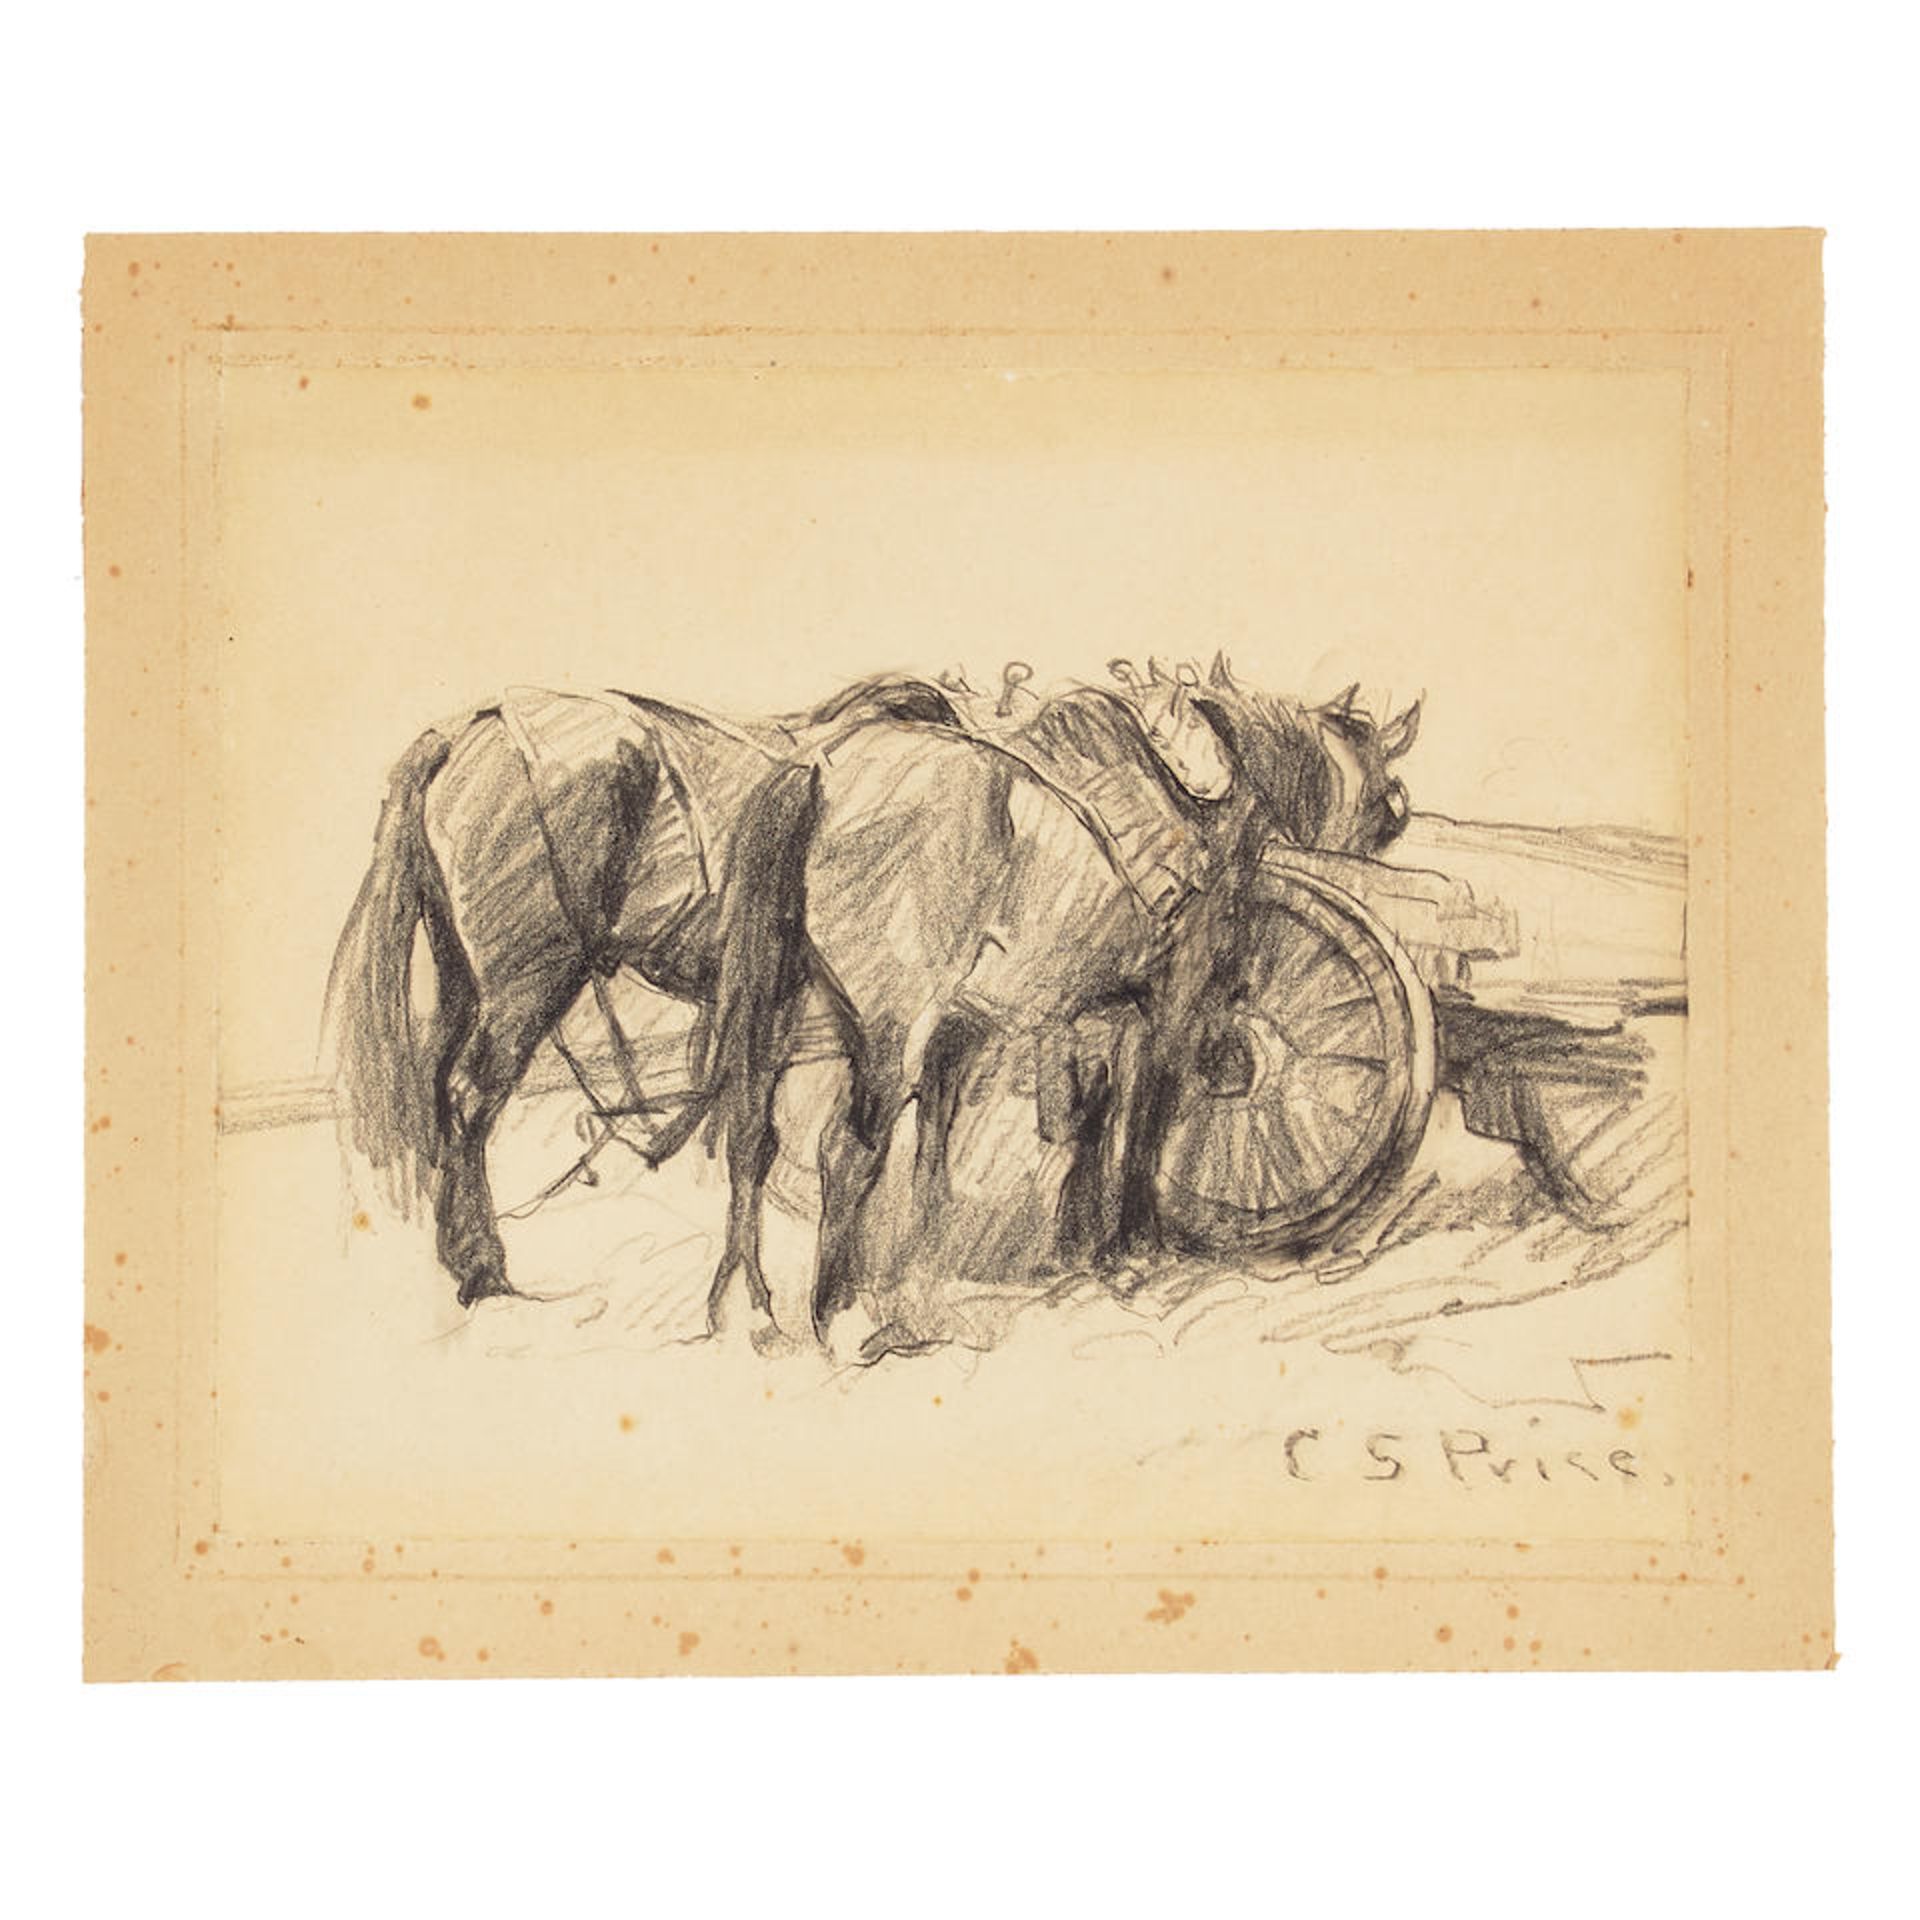 Clayton S. Price (1874-1950) Two Horses by a Cart sheet 7 3/4 x 10 in. framed 11 1/2 x 14 1/2 in. - Image 2 of 2